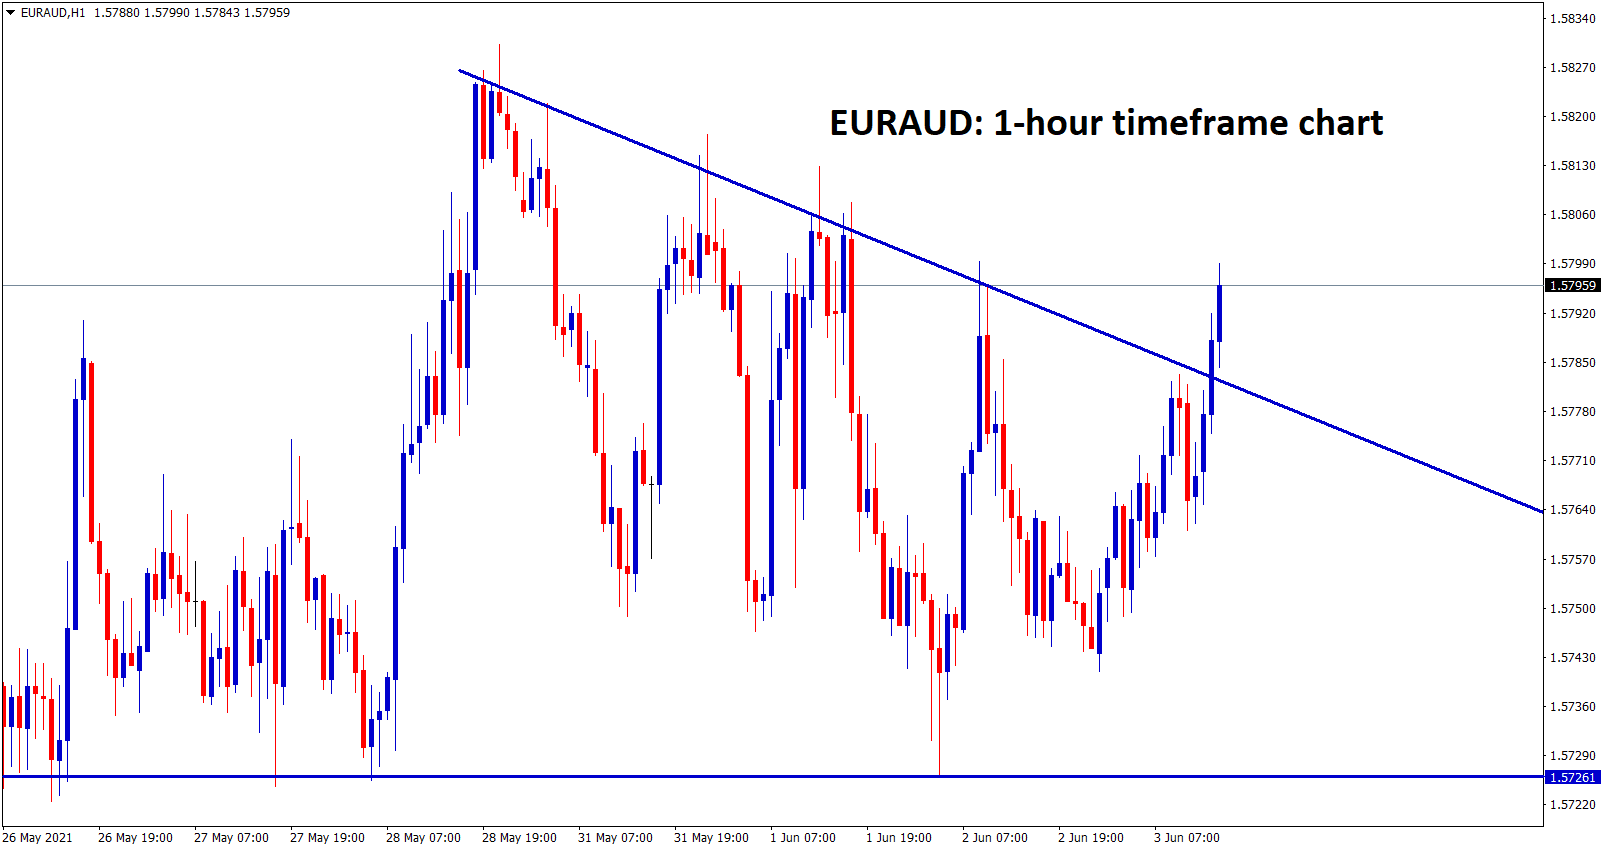 EURAUD broken the top level of the descending Triangle pattern